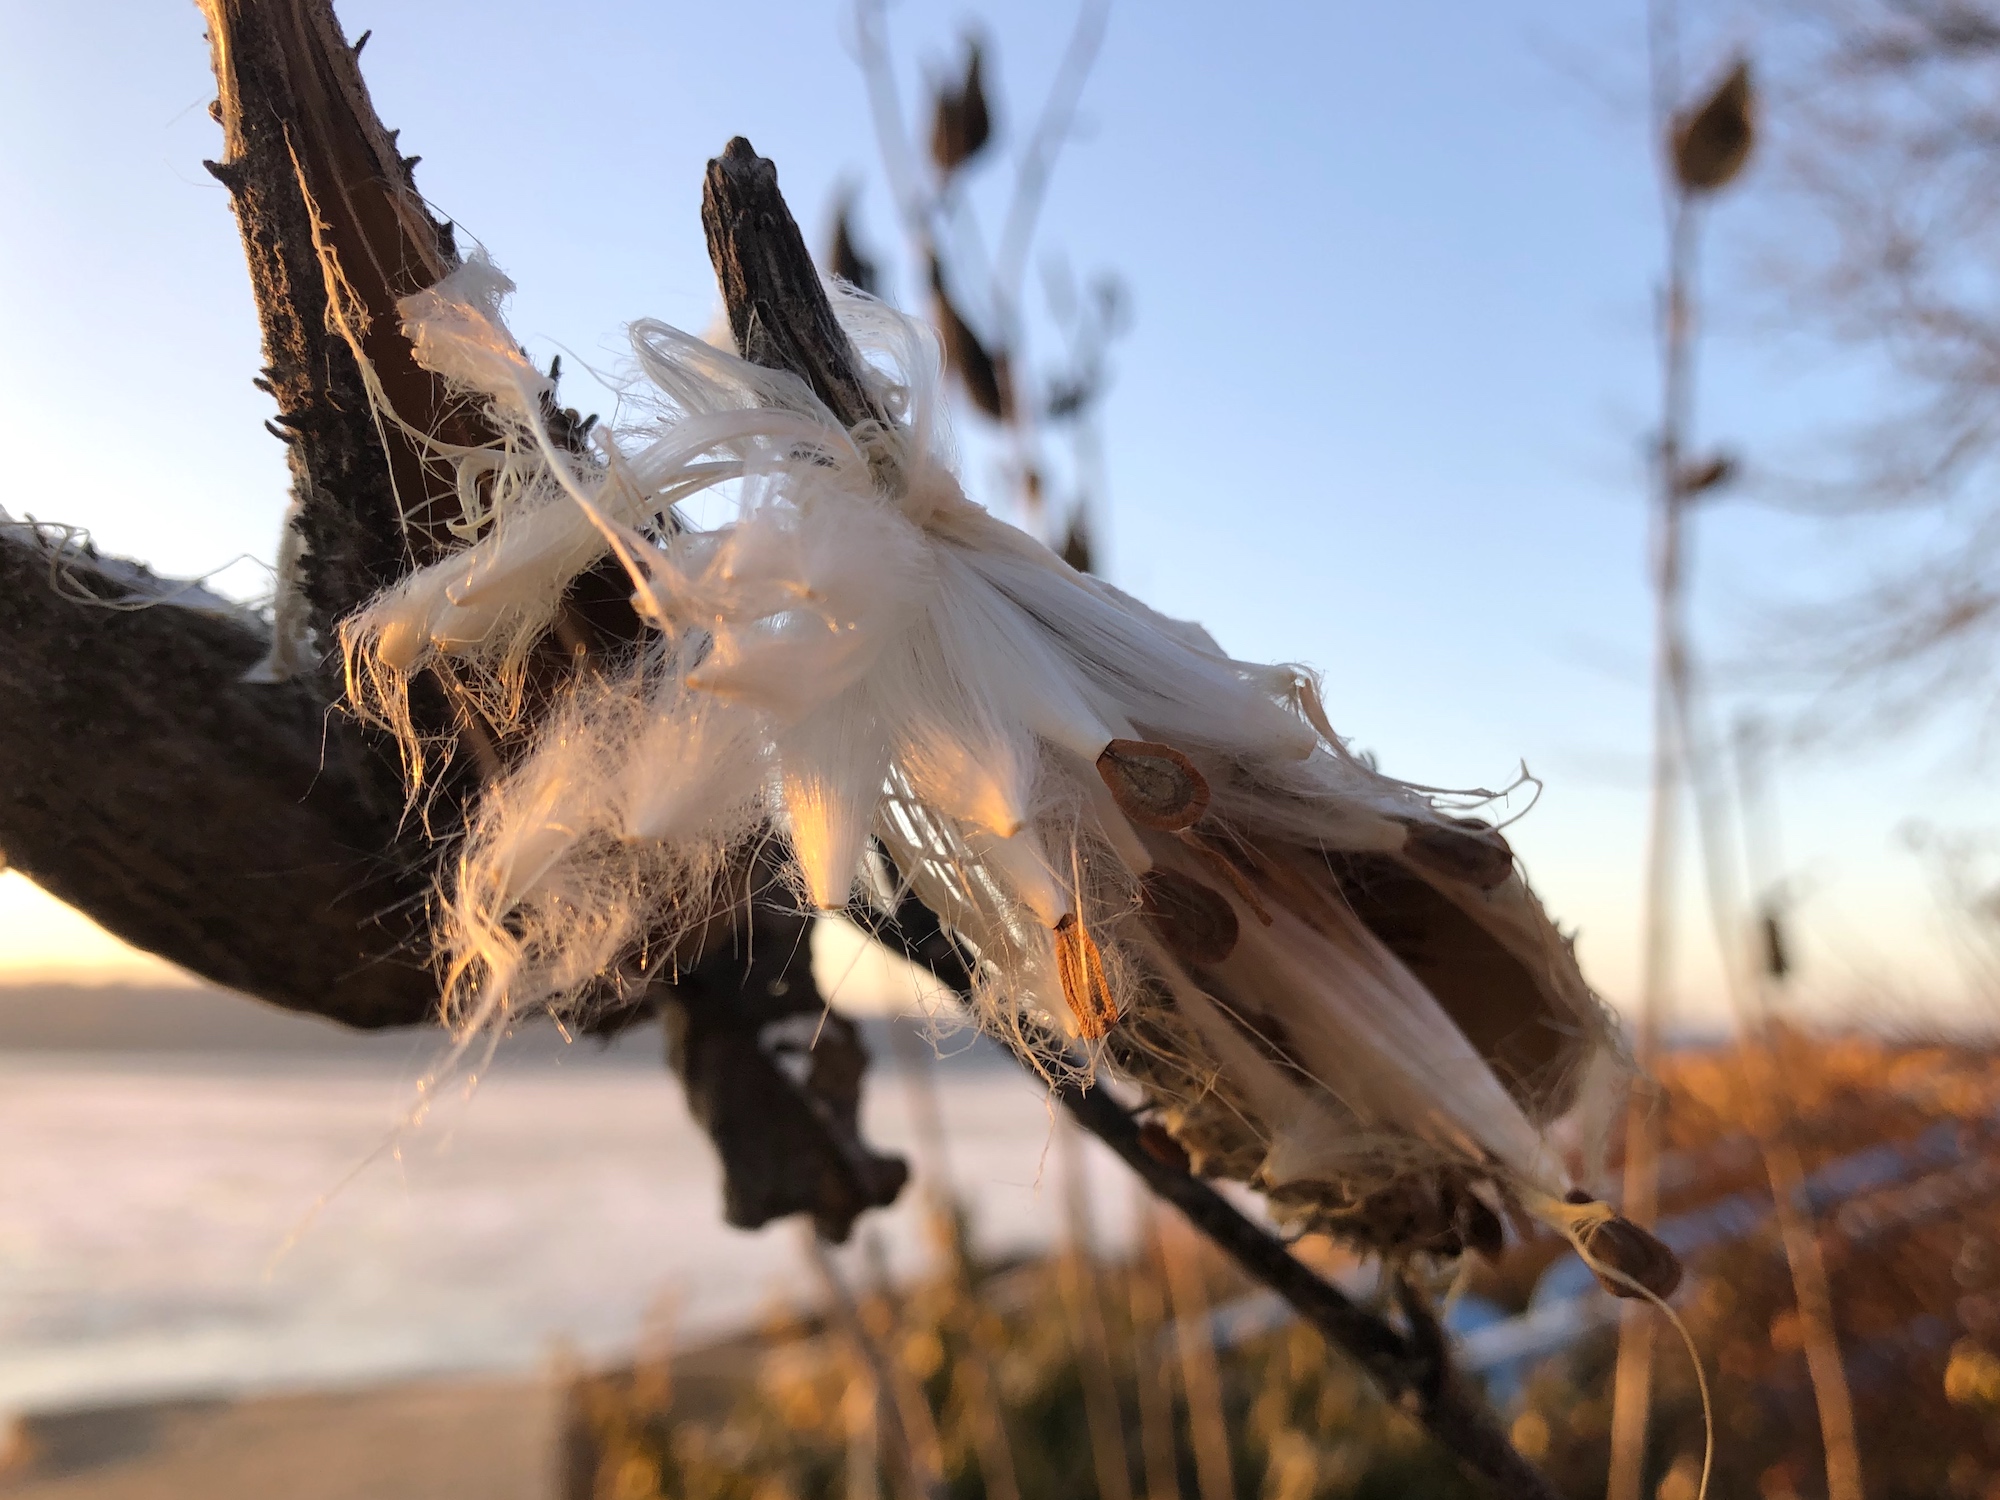 Common Milkweed by Wingra Boats on December 21, 2019.